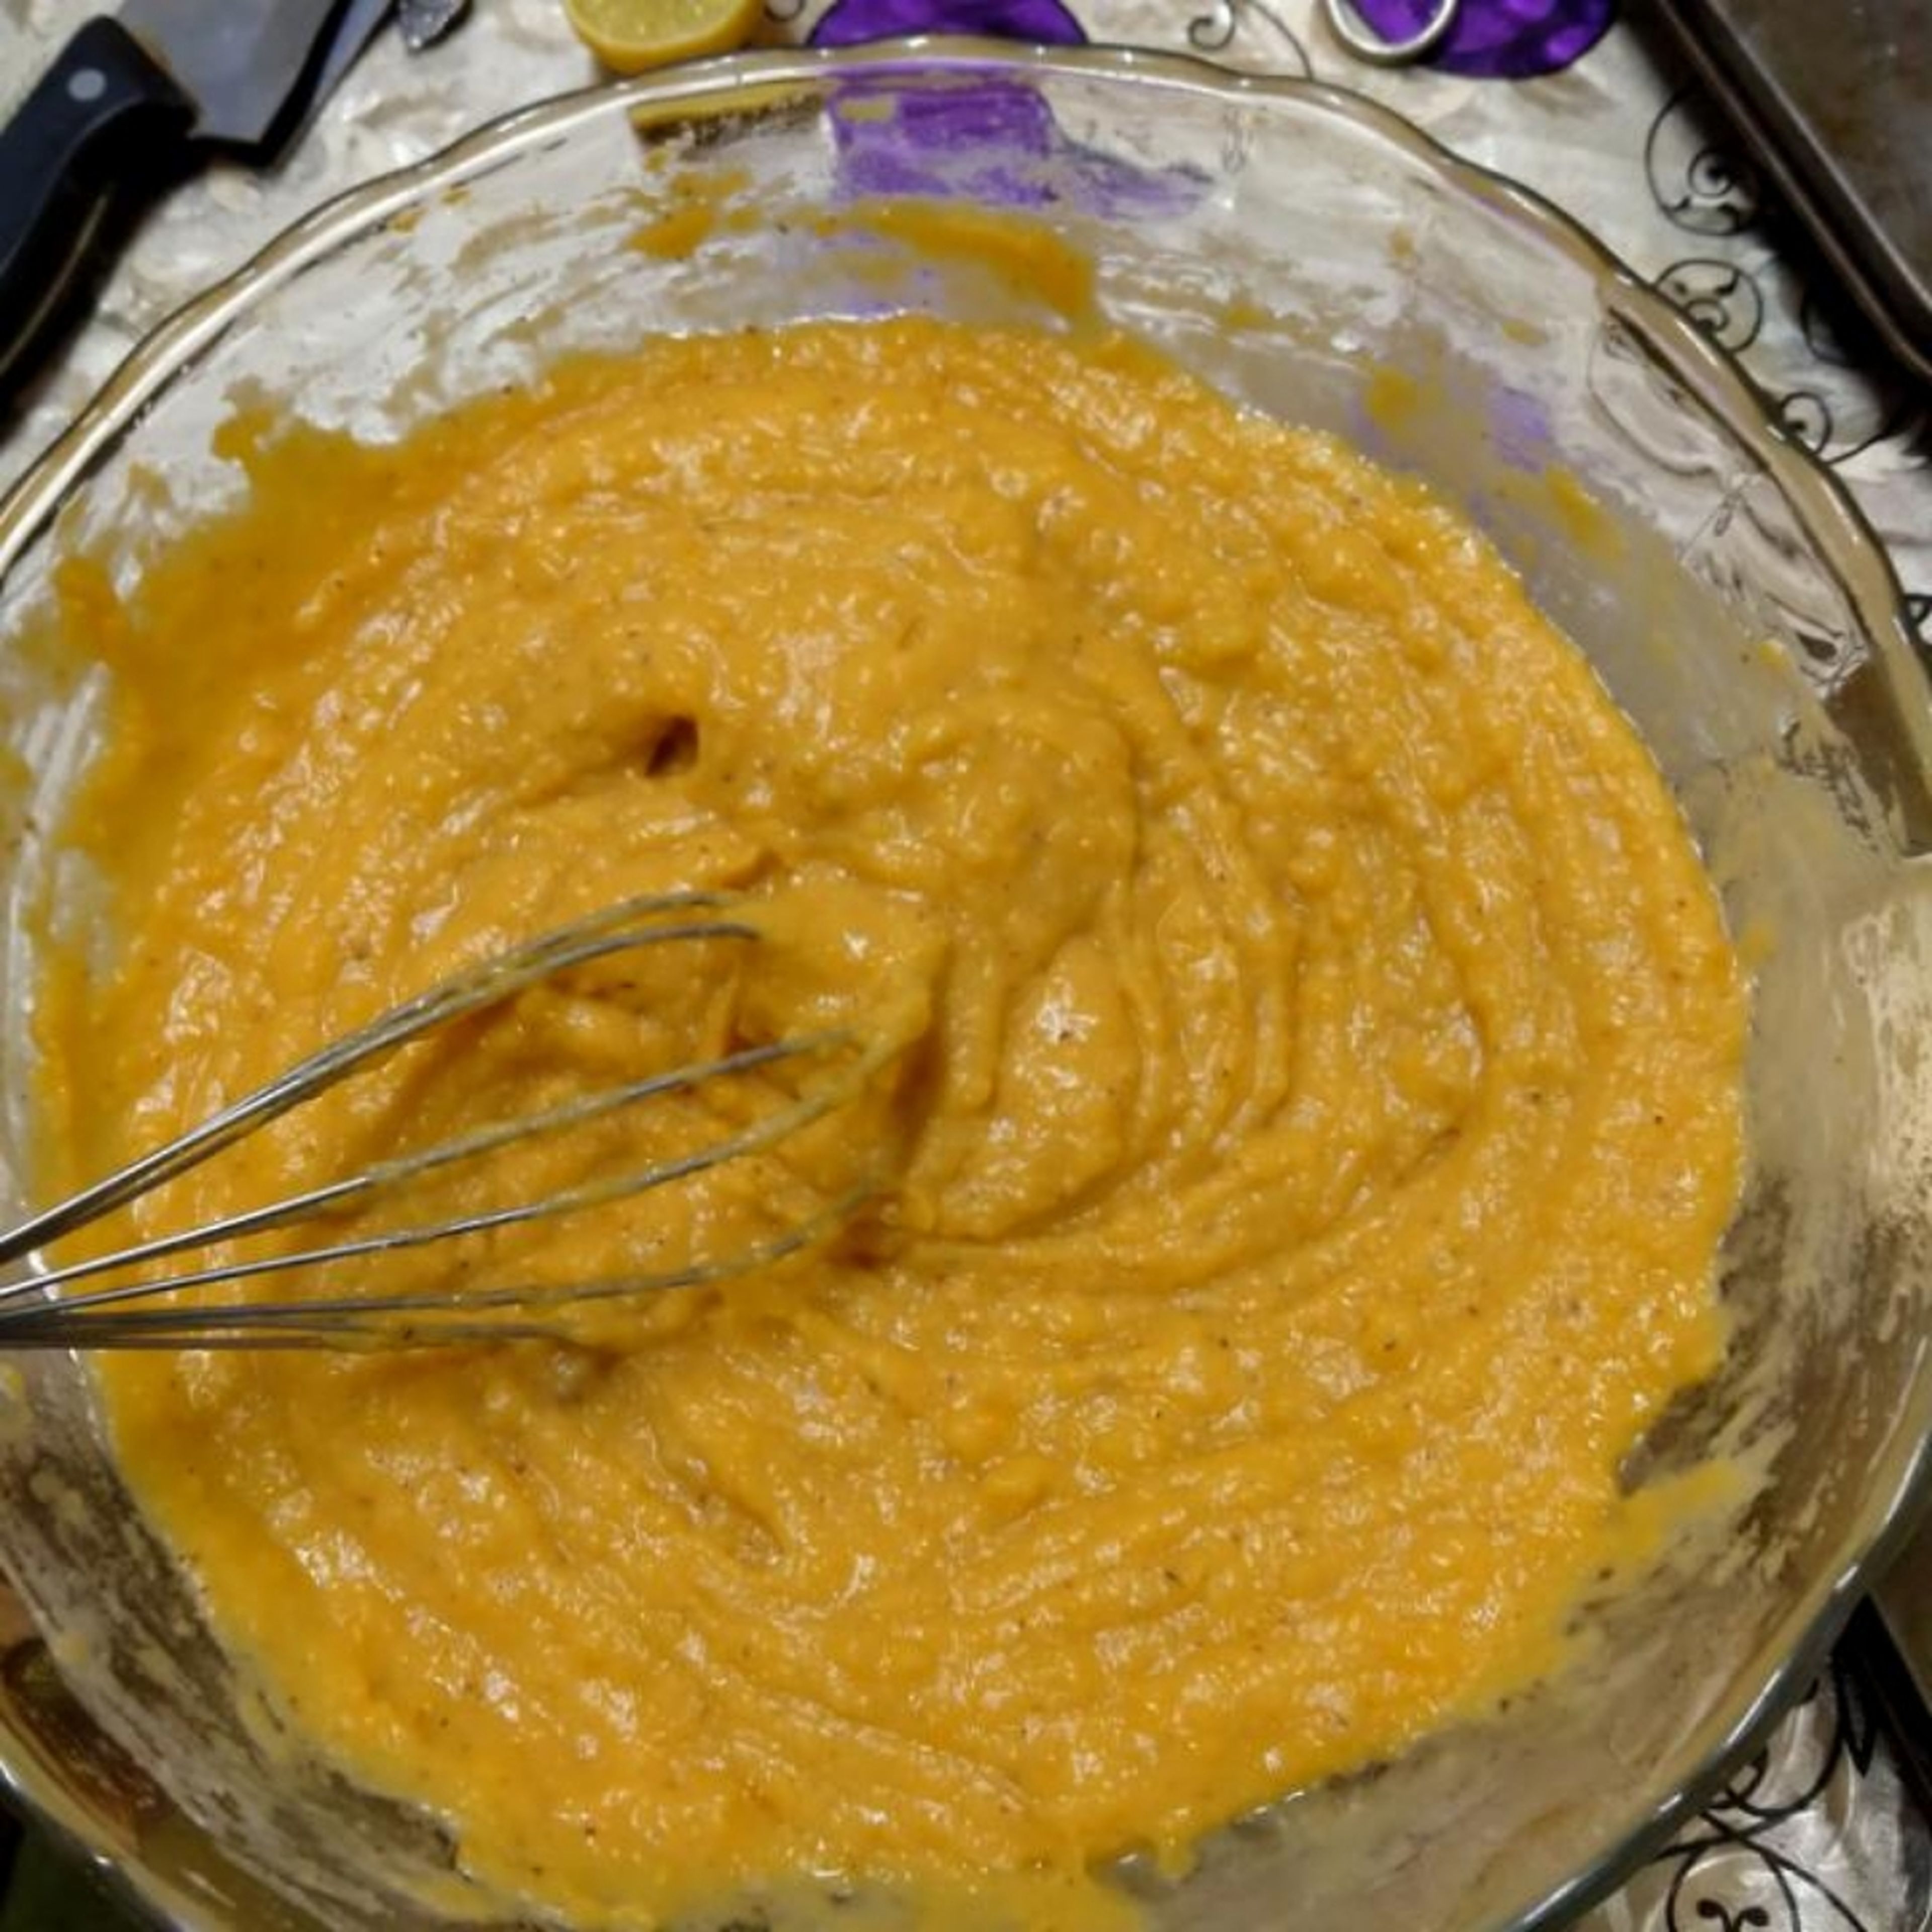 with a hand whisk or electric mixer mix and mash the sweet potato until well mashed and smooth then add the sugar and milk and mix to incorporate well add the eggs one by one. add the flour, lemon and all the spices and vanilla and mix mix mix . at the end add the melted butter and mix well